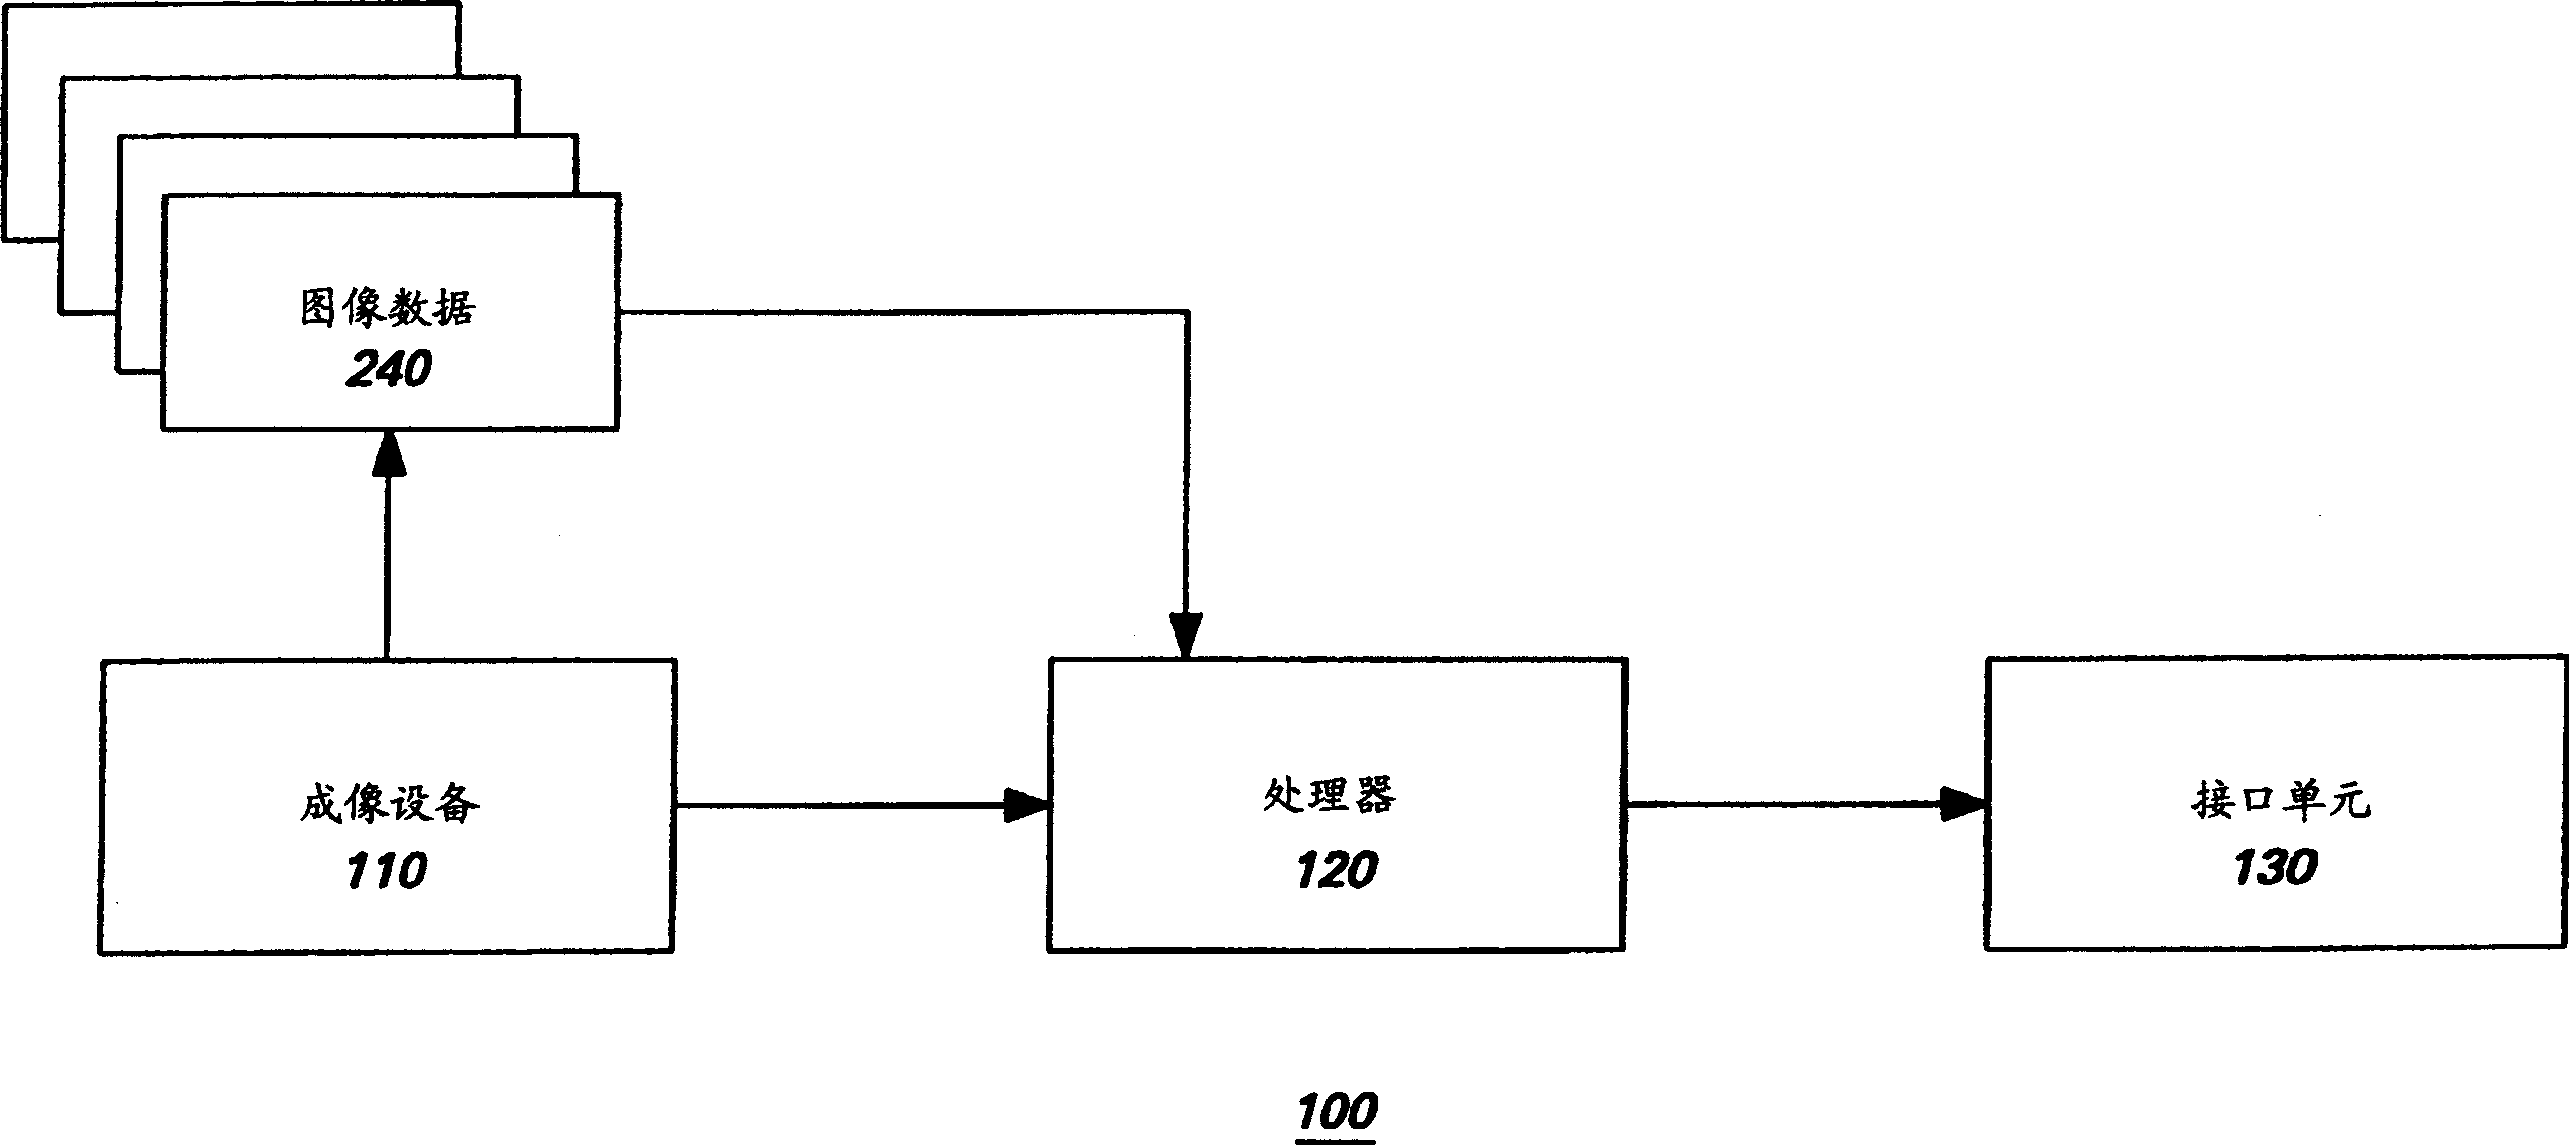 Method and system for airway measurement